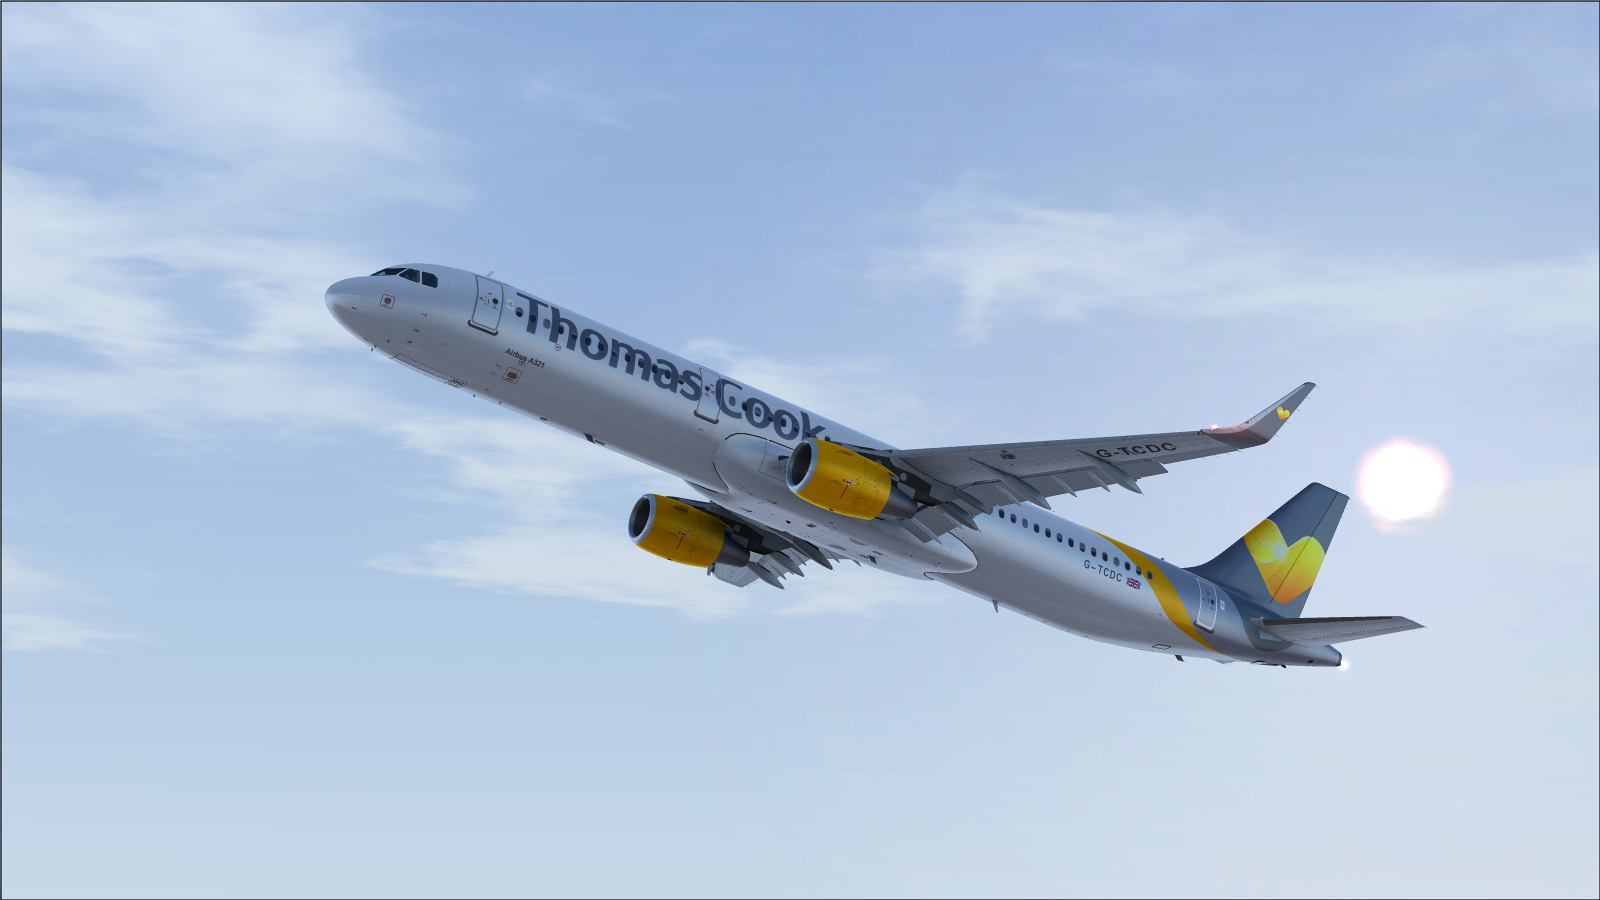 More information about "Airbus A321 CFM Sharklet Thomas Cook Sunny Heart G-TCDC"